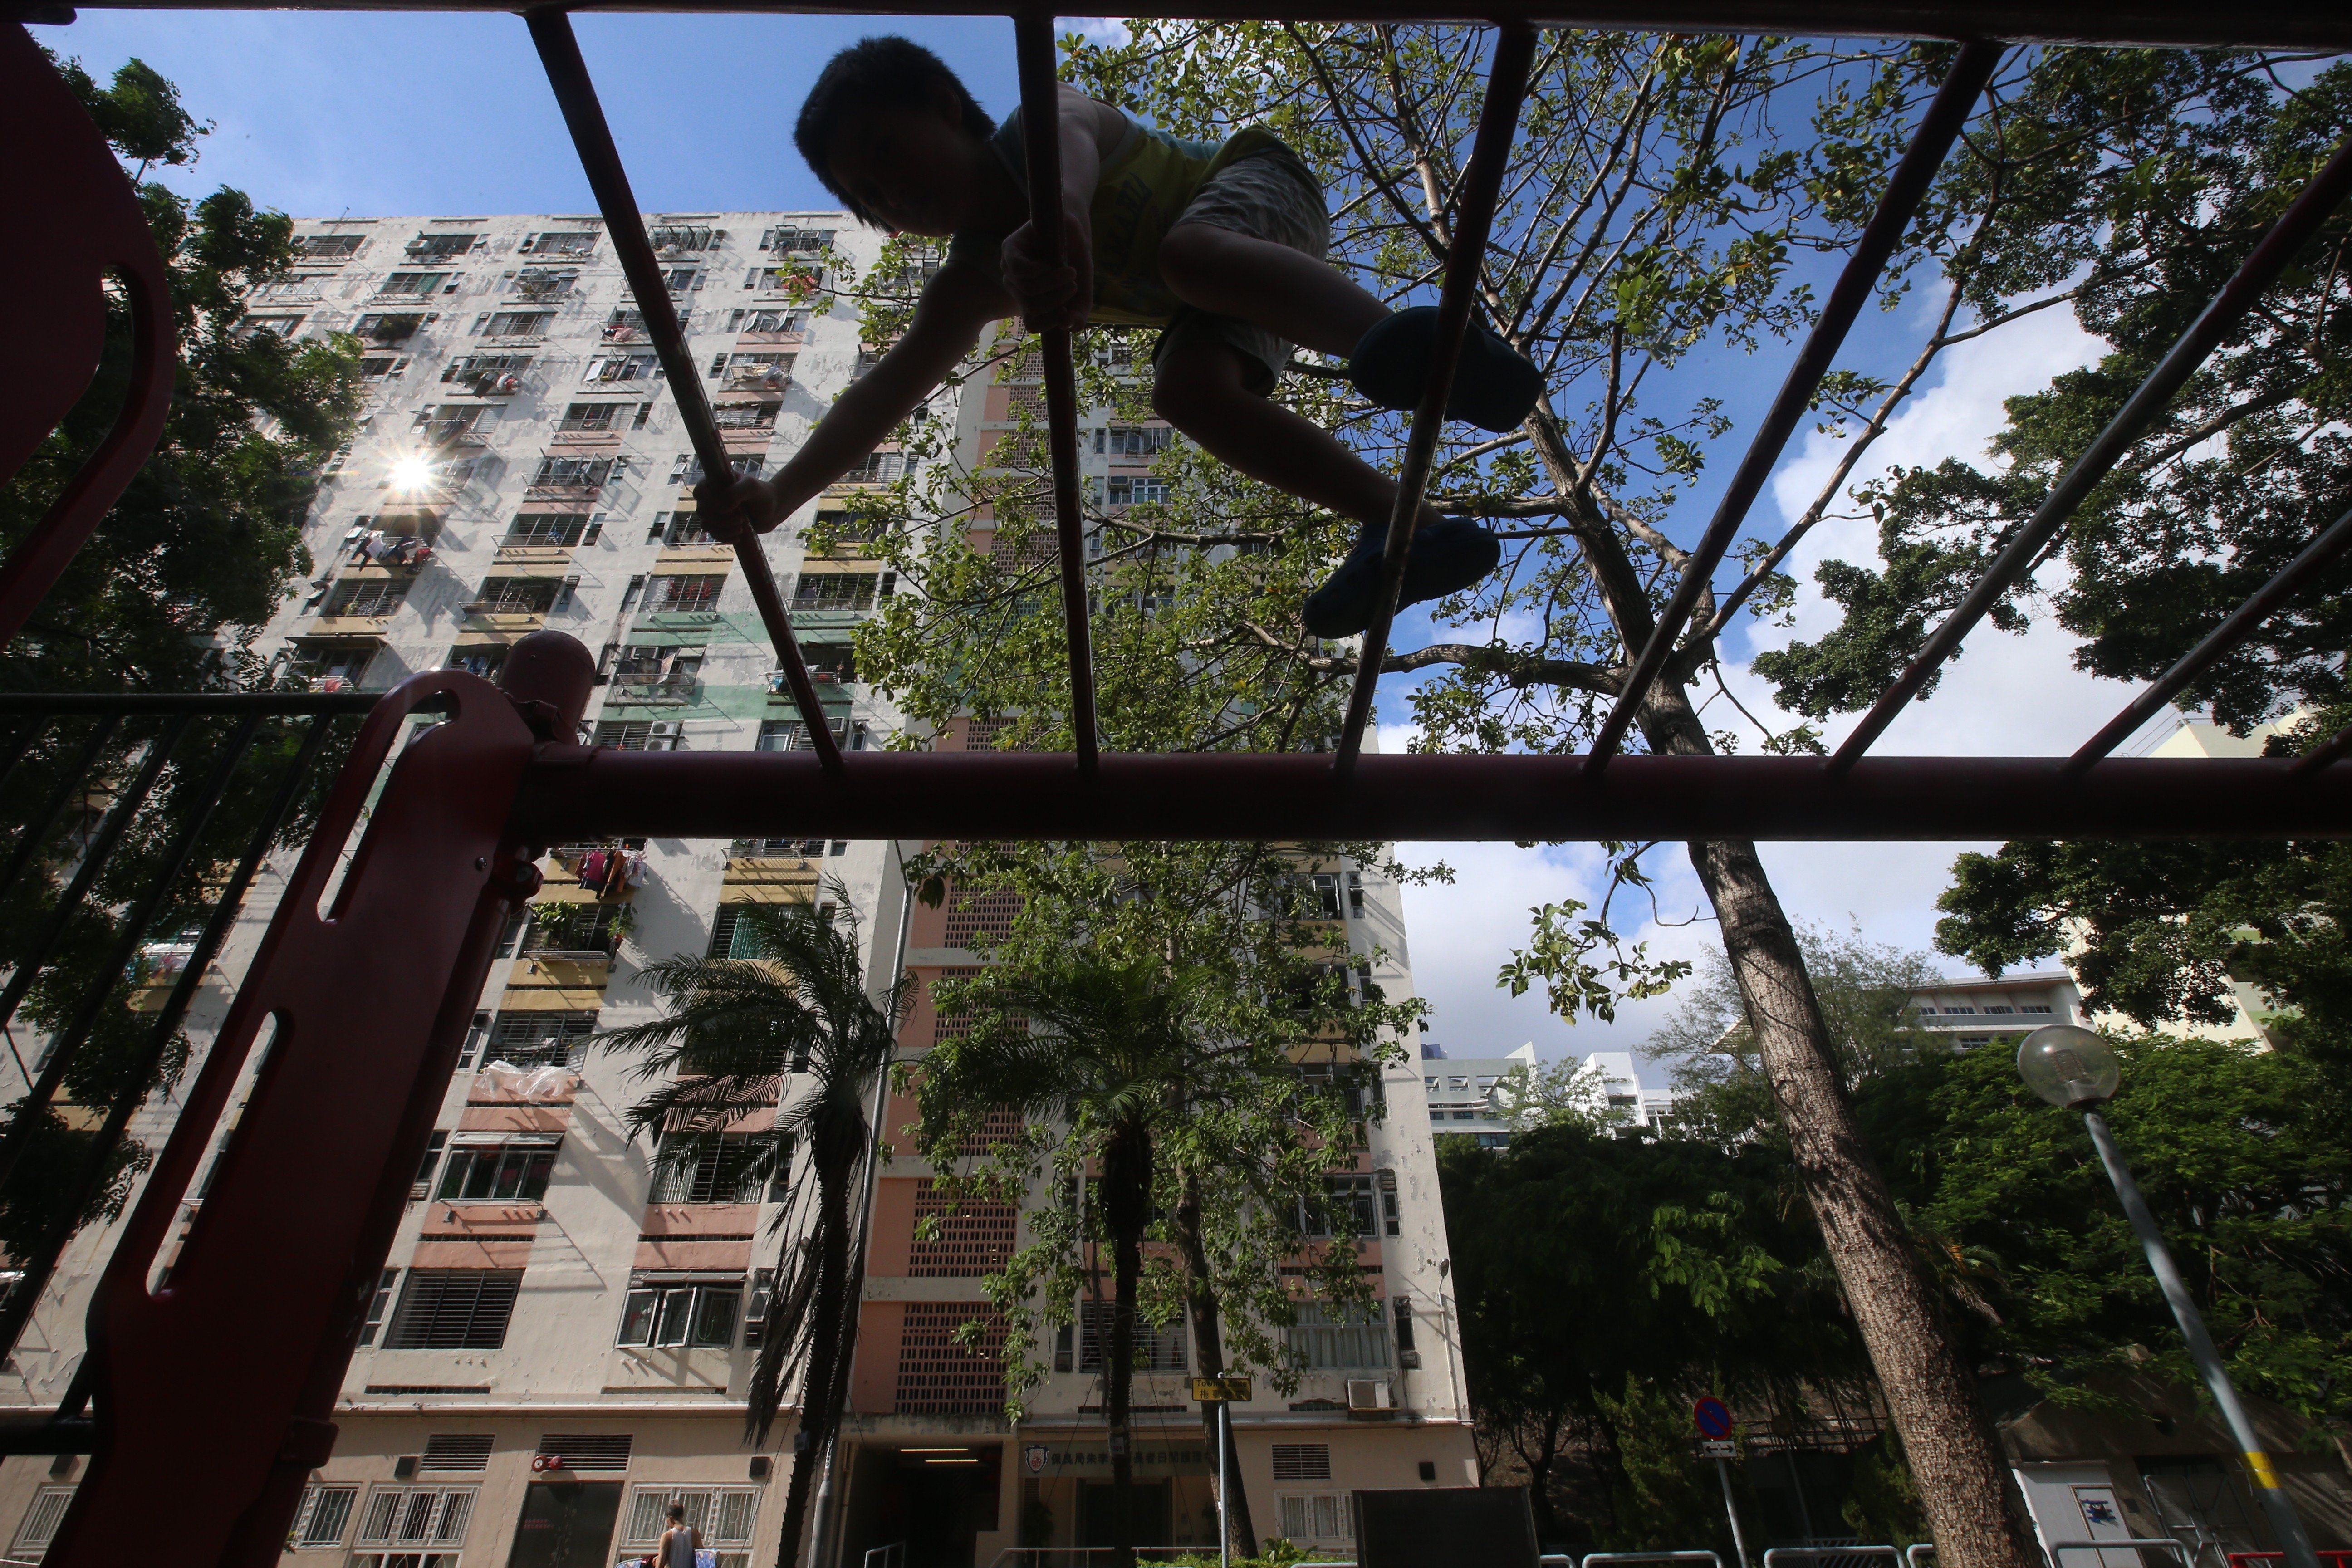 The waiting list for public housing in Hong Kong has grown longer in recent years, with 284,000 applications now pending. Photo: Photo: K. Y. Cheng